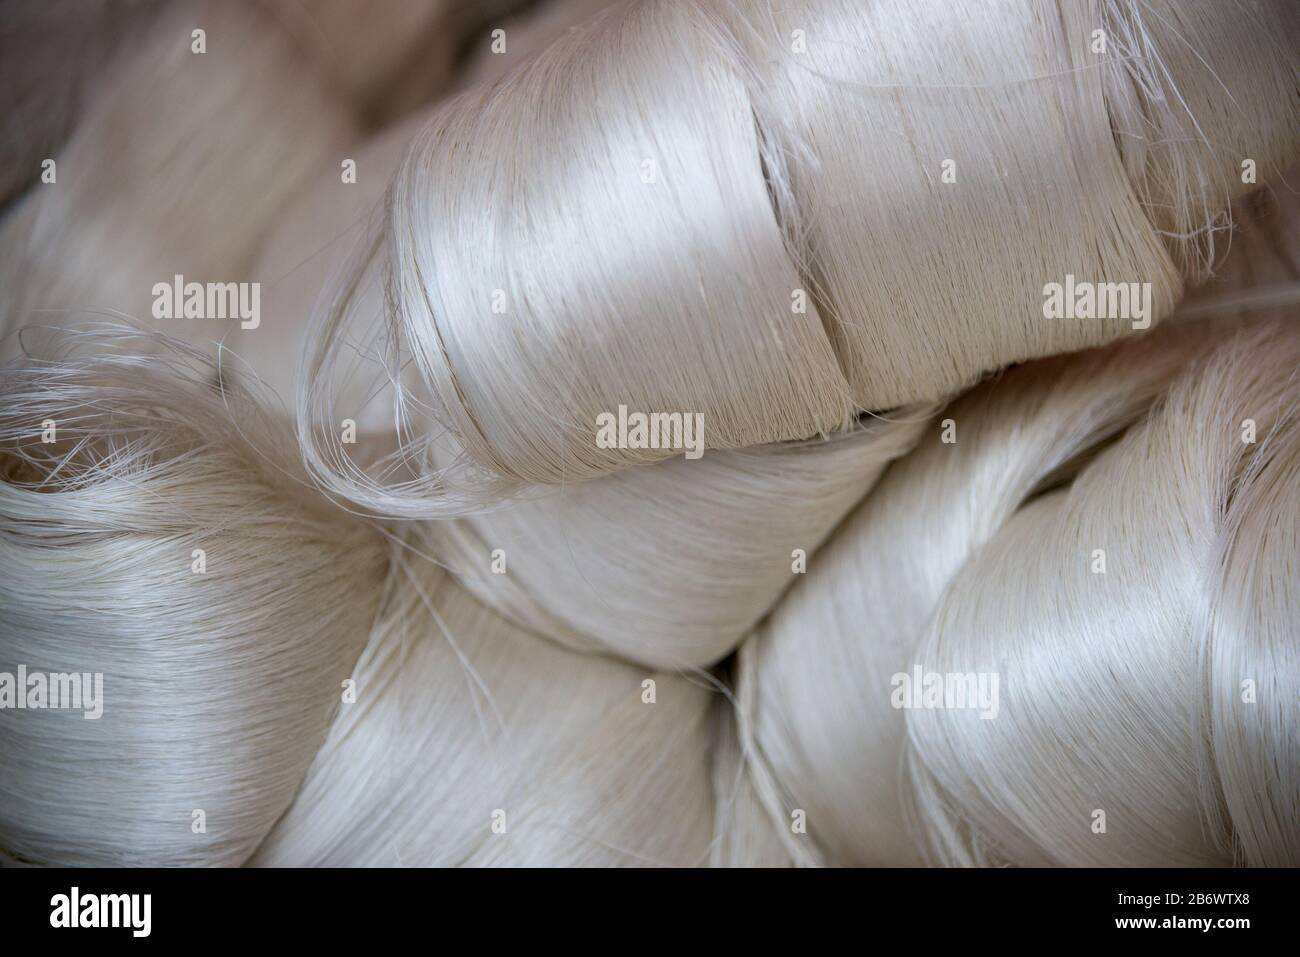 White silk fibres close-up. Illustration about silk production technology. Stock Photo